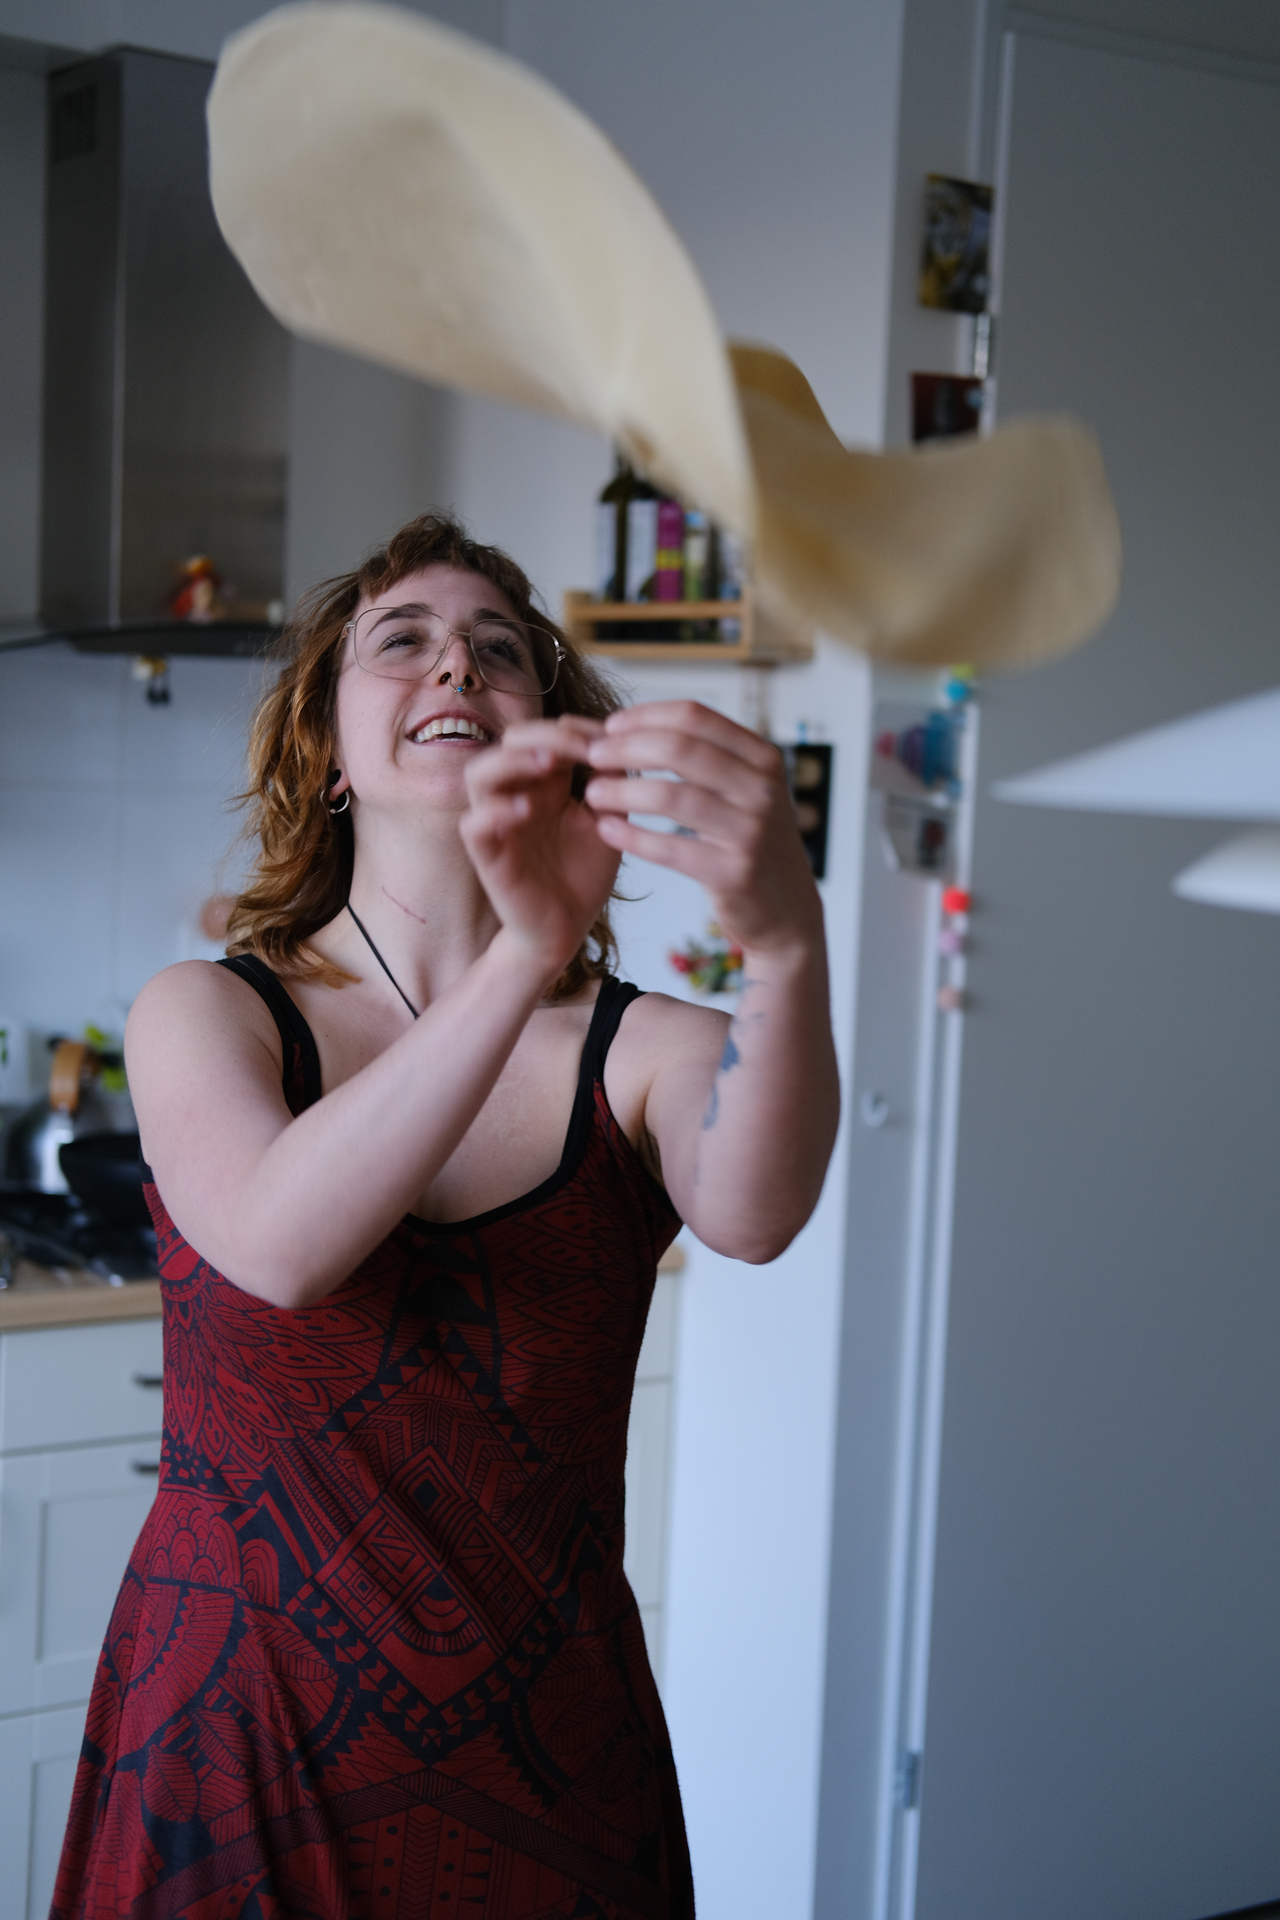 Noemi spinning pasta dough like it is a pizza. At least it got its proper stretching. My mother's kitchen in Tilburg, 2022.